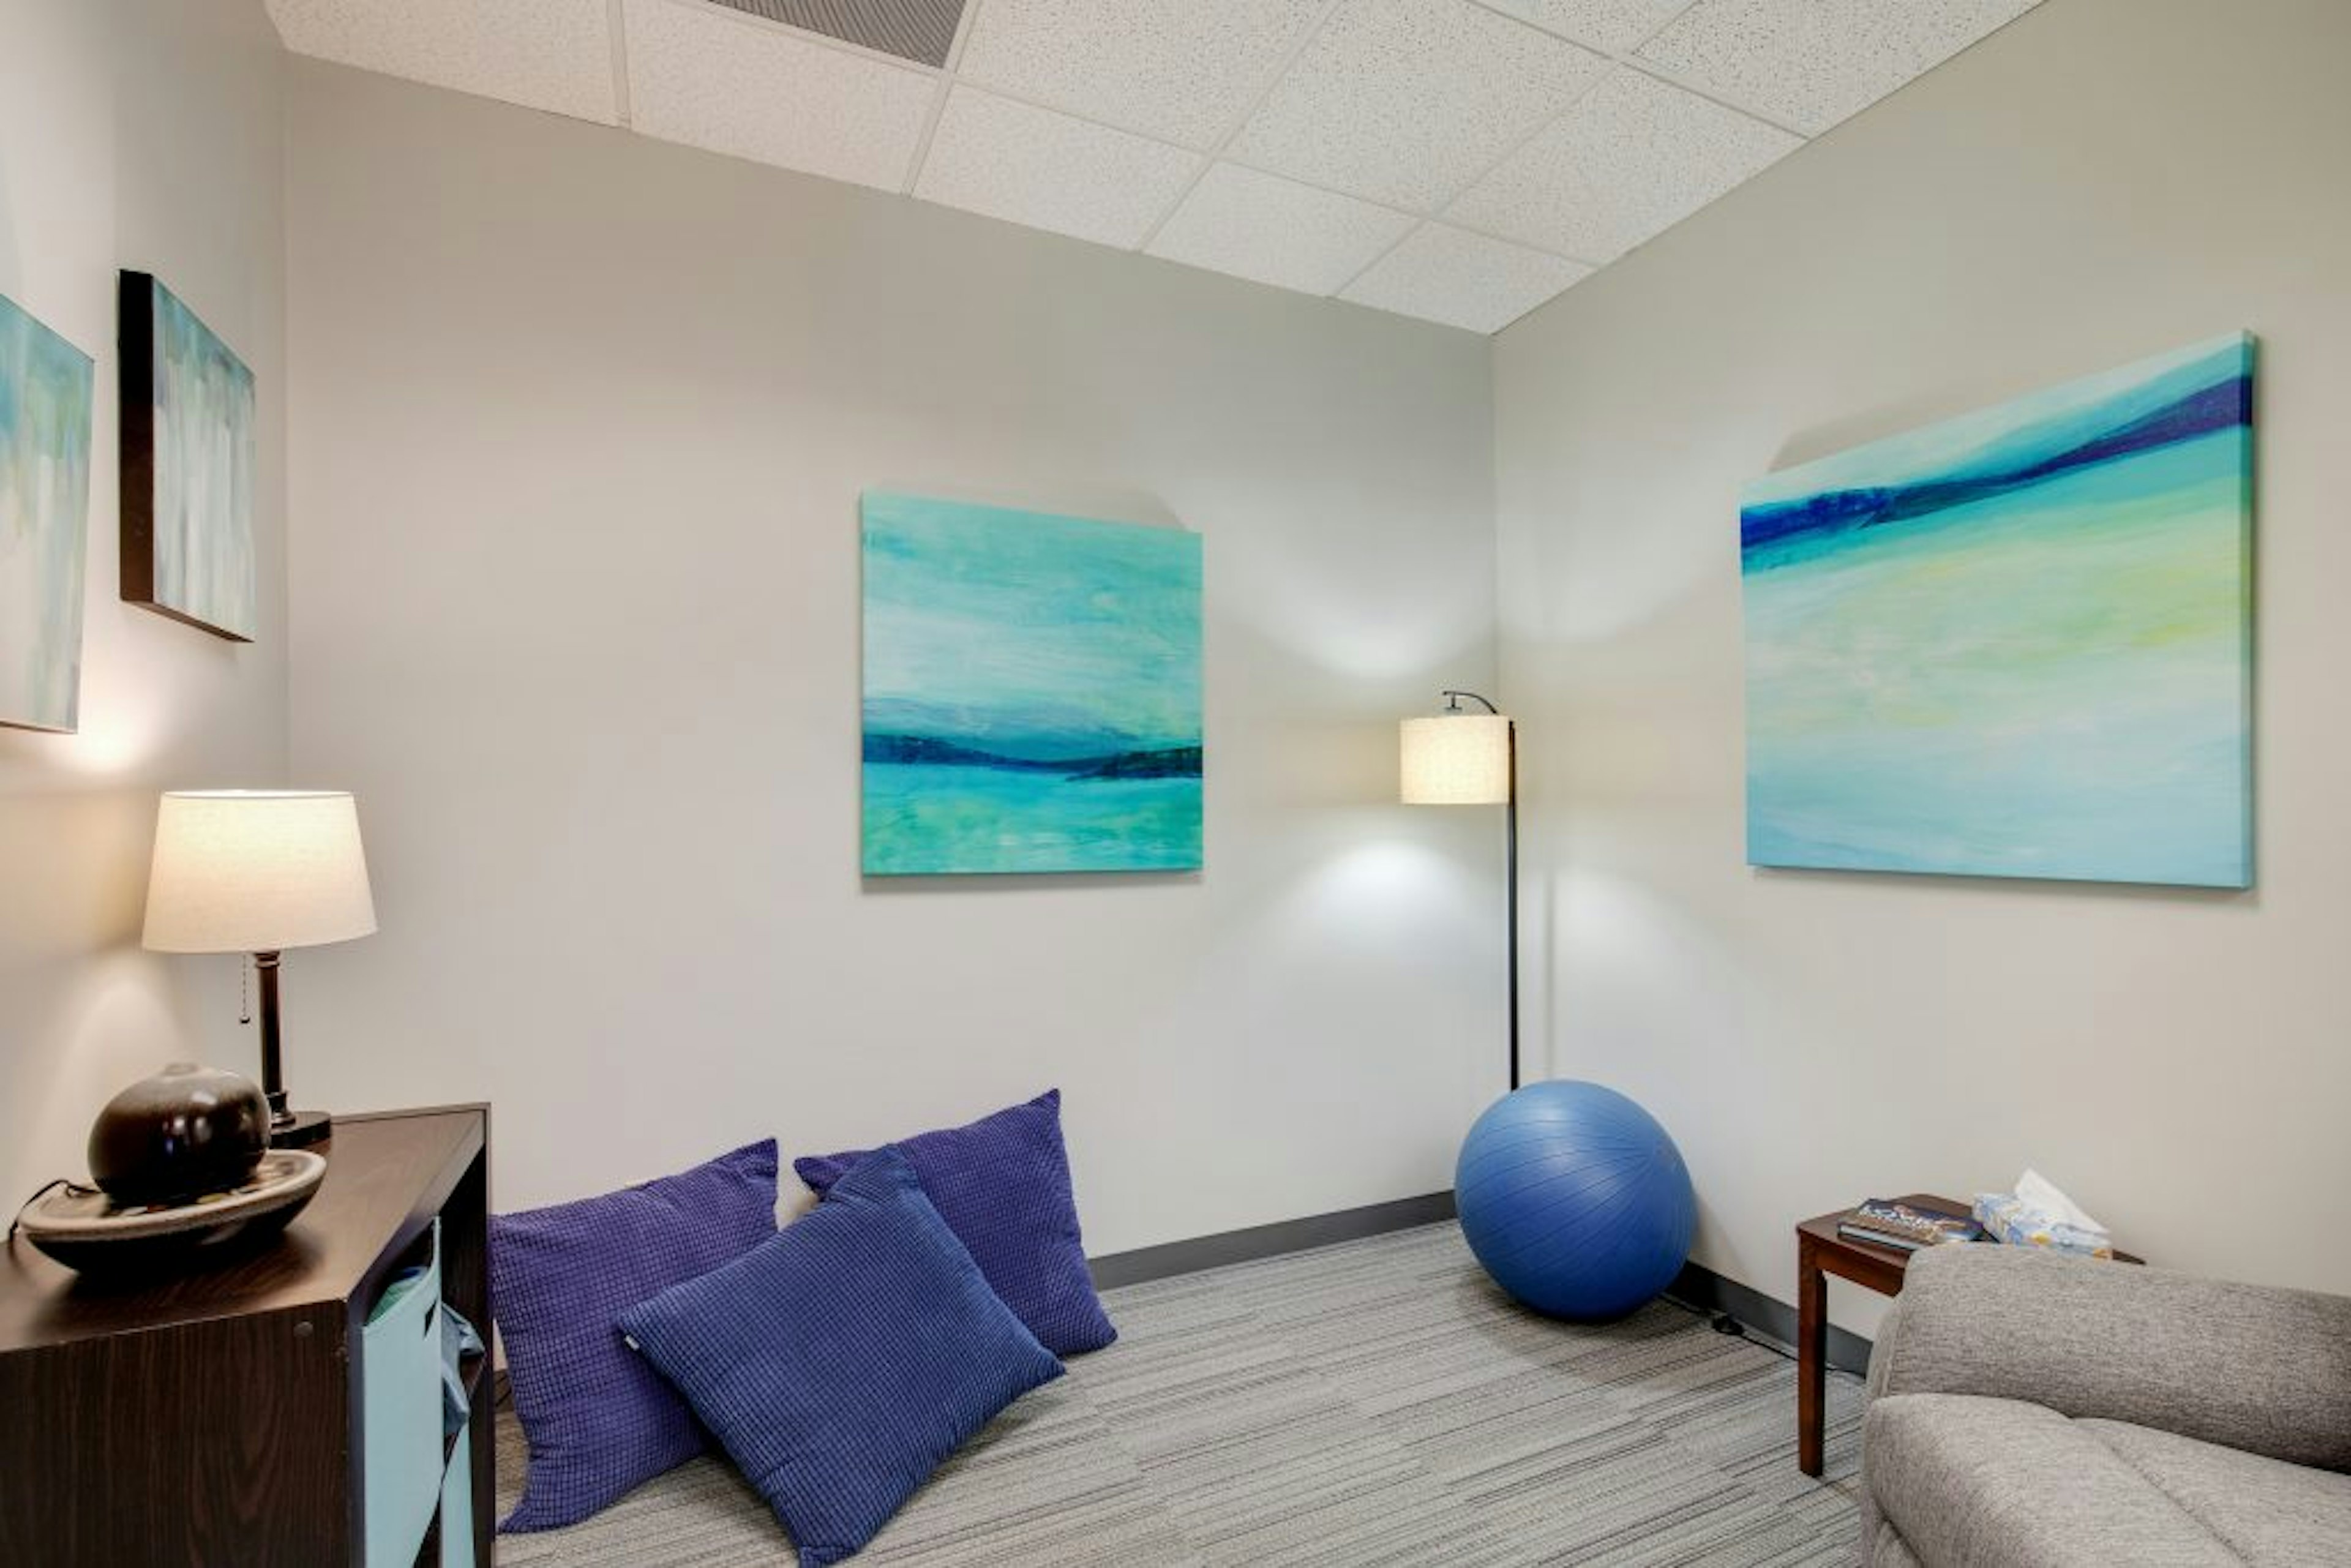 Office with blue pillows leaning up against wall, blue exercise ball, gray couch, and blue art on walls.